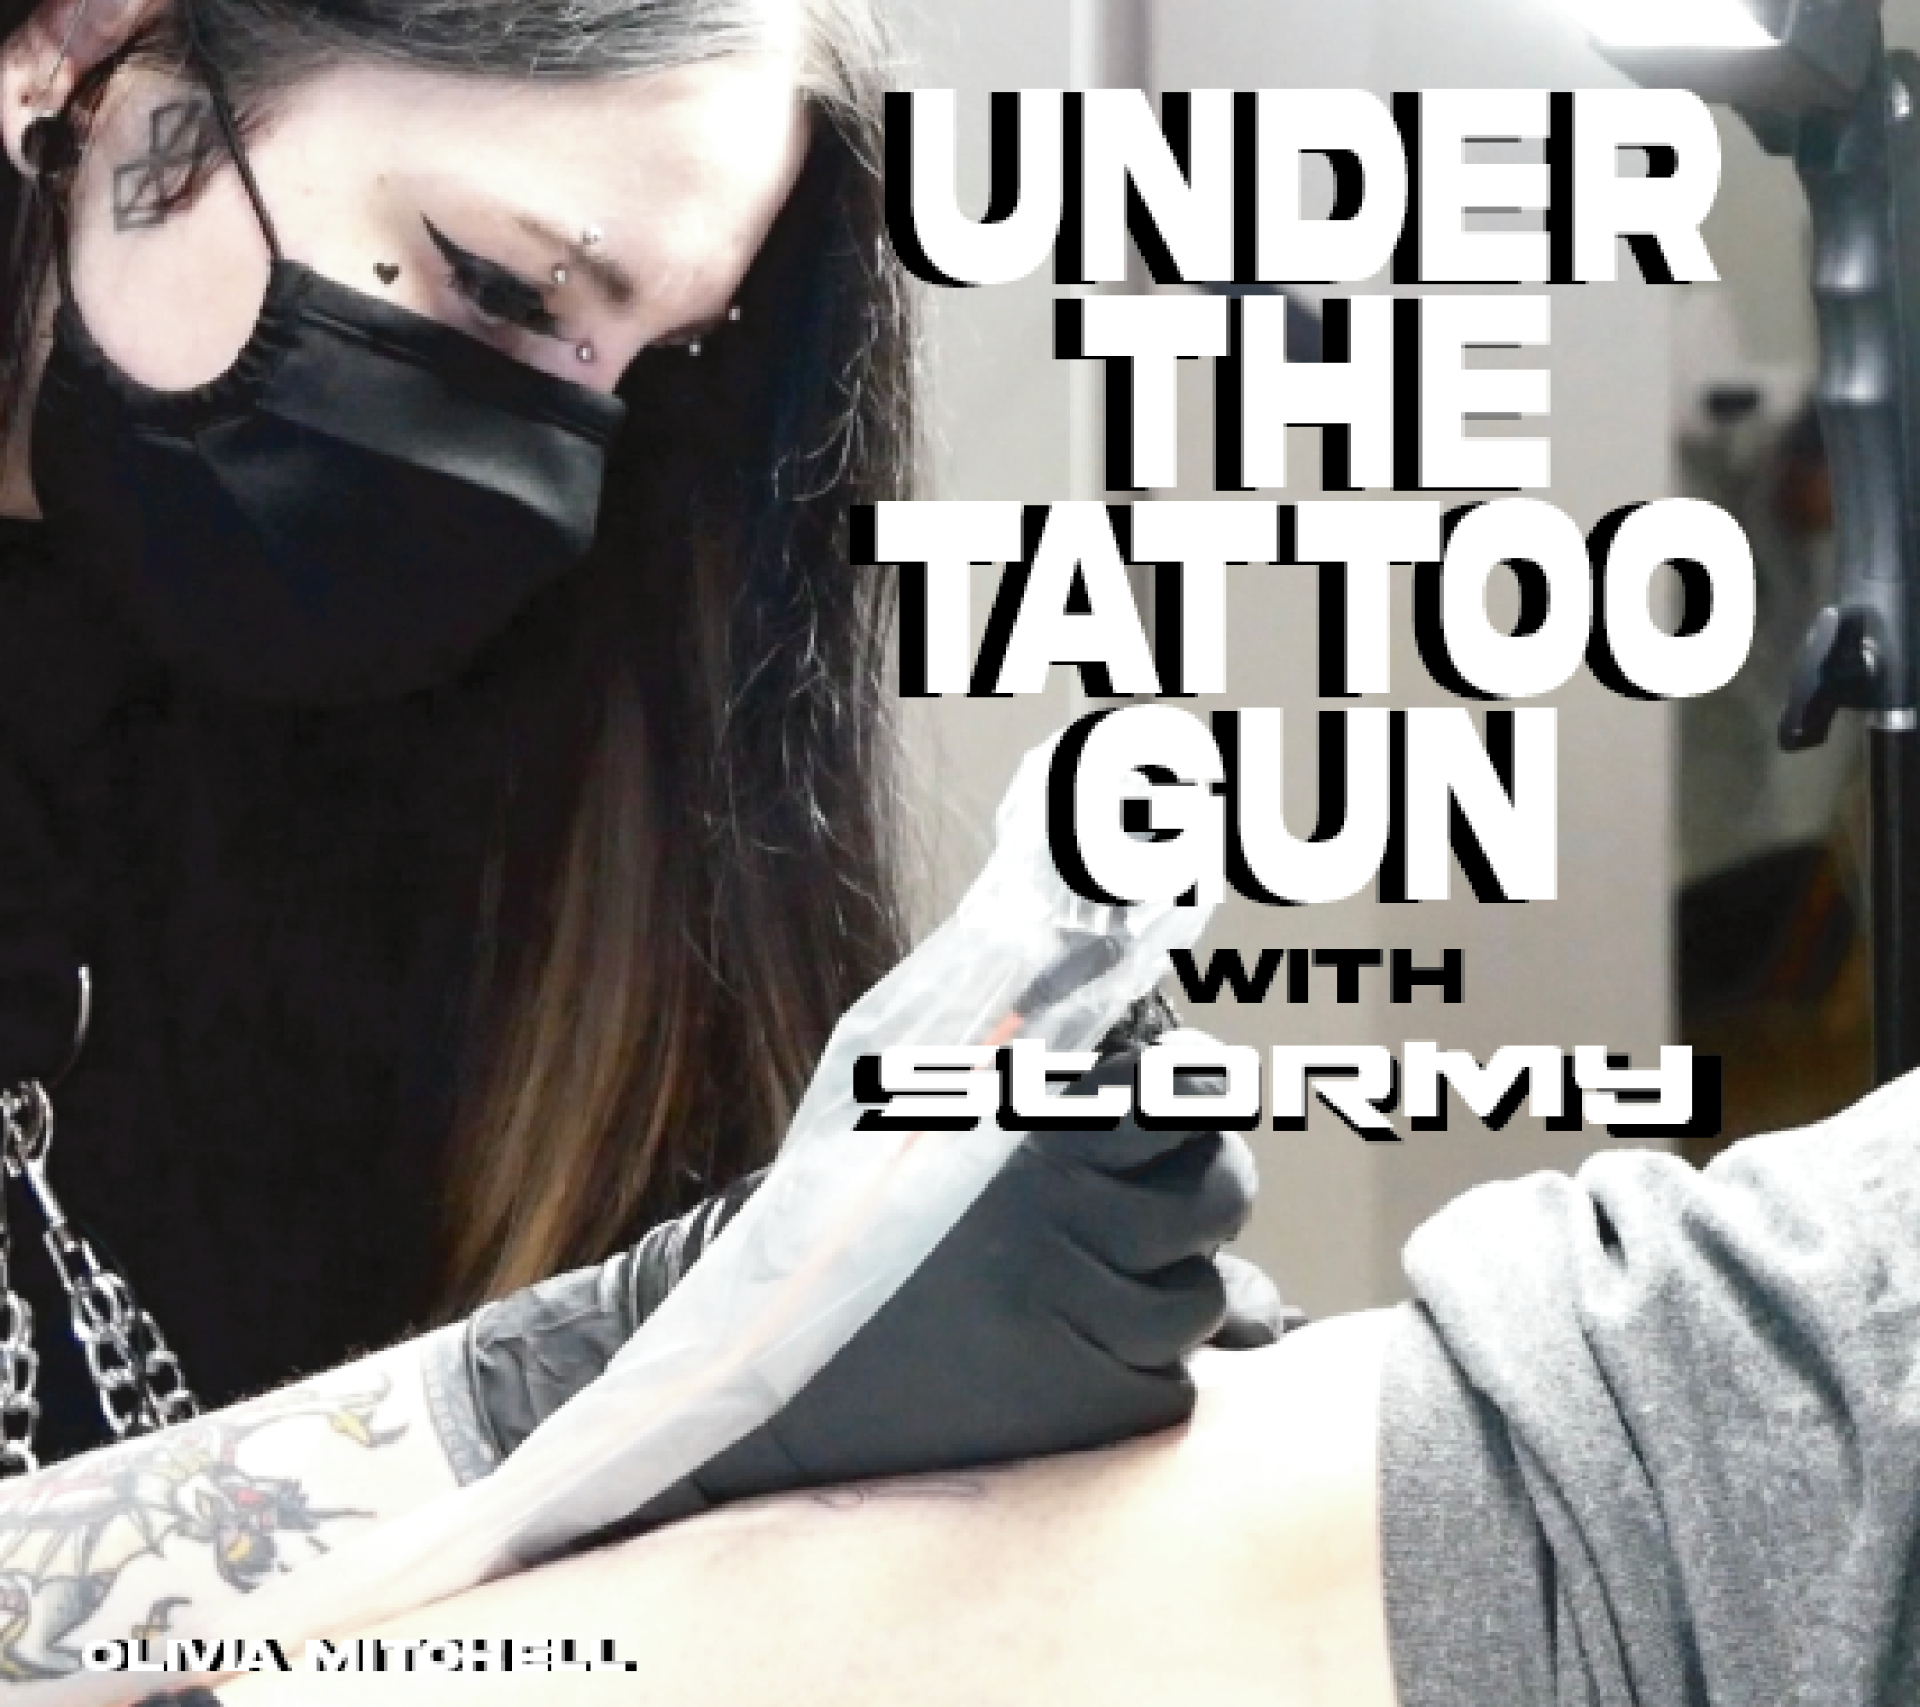 behind the tattoo gun_project_image